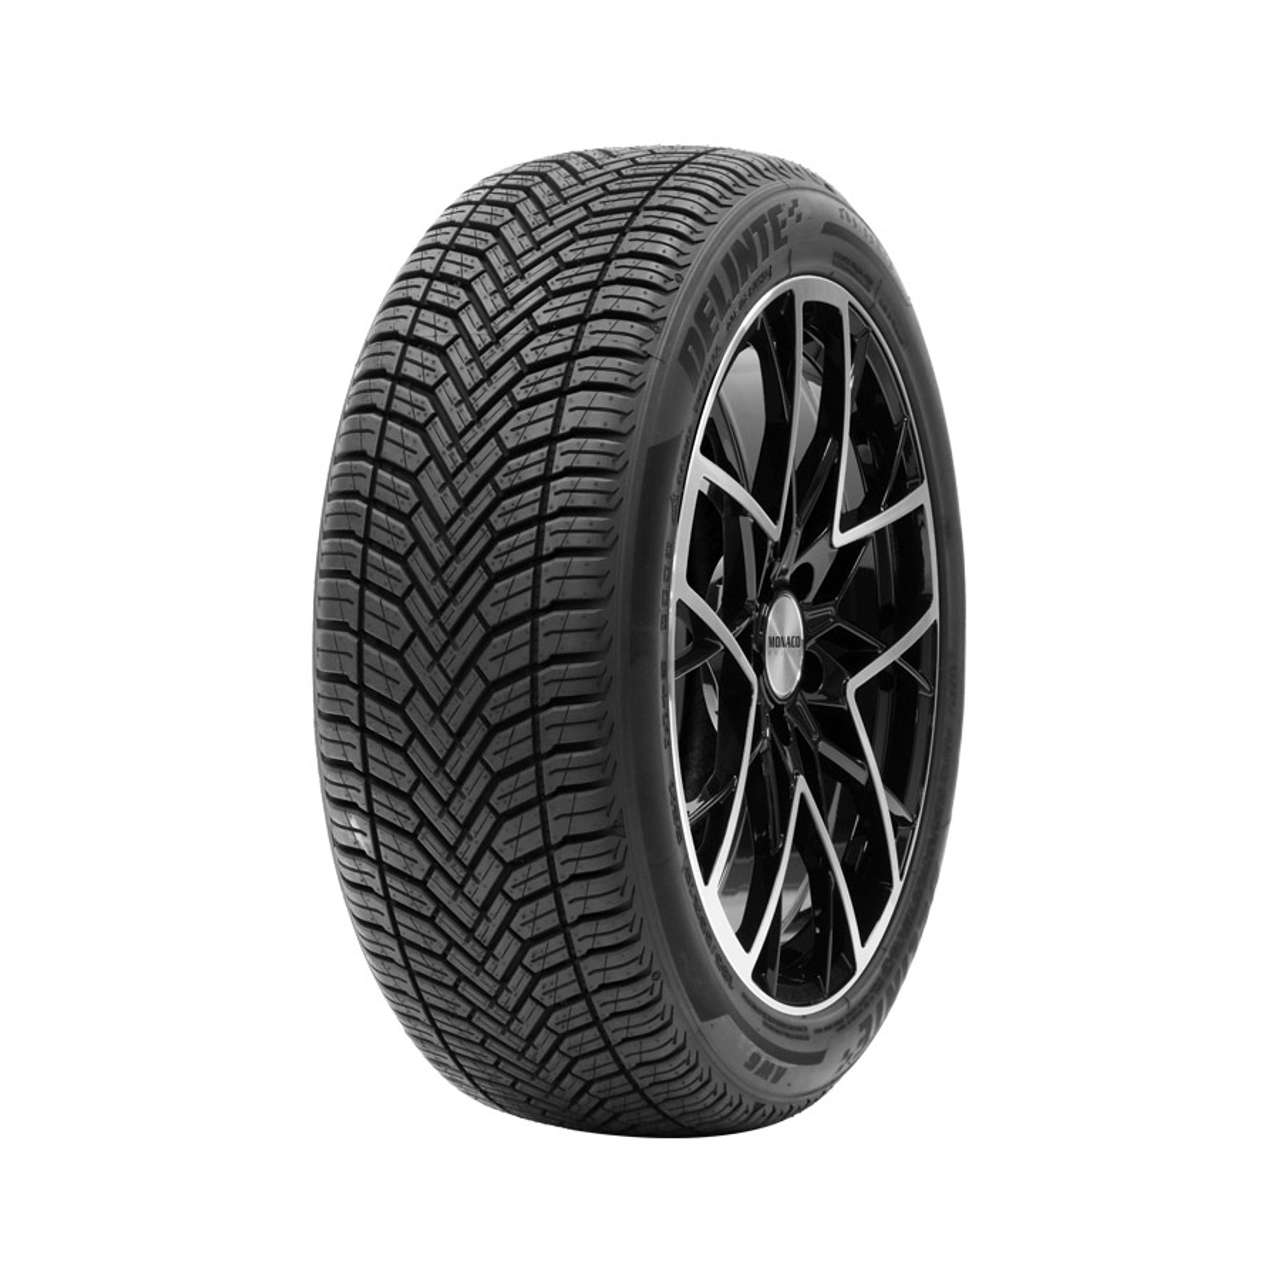 DELINTE AW6 185/55R15 82H BSW